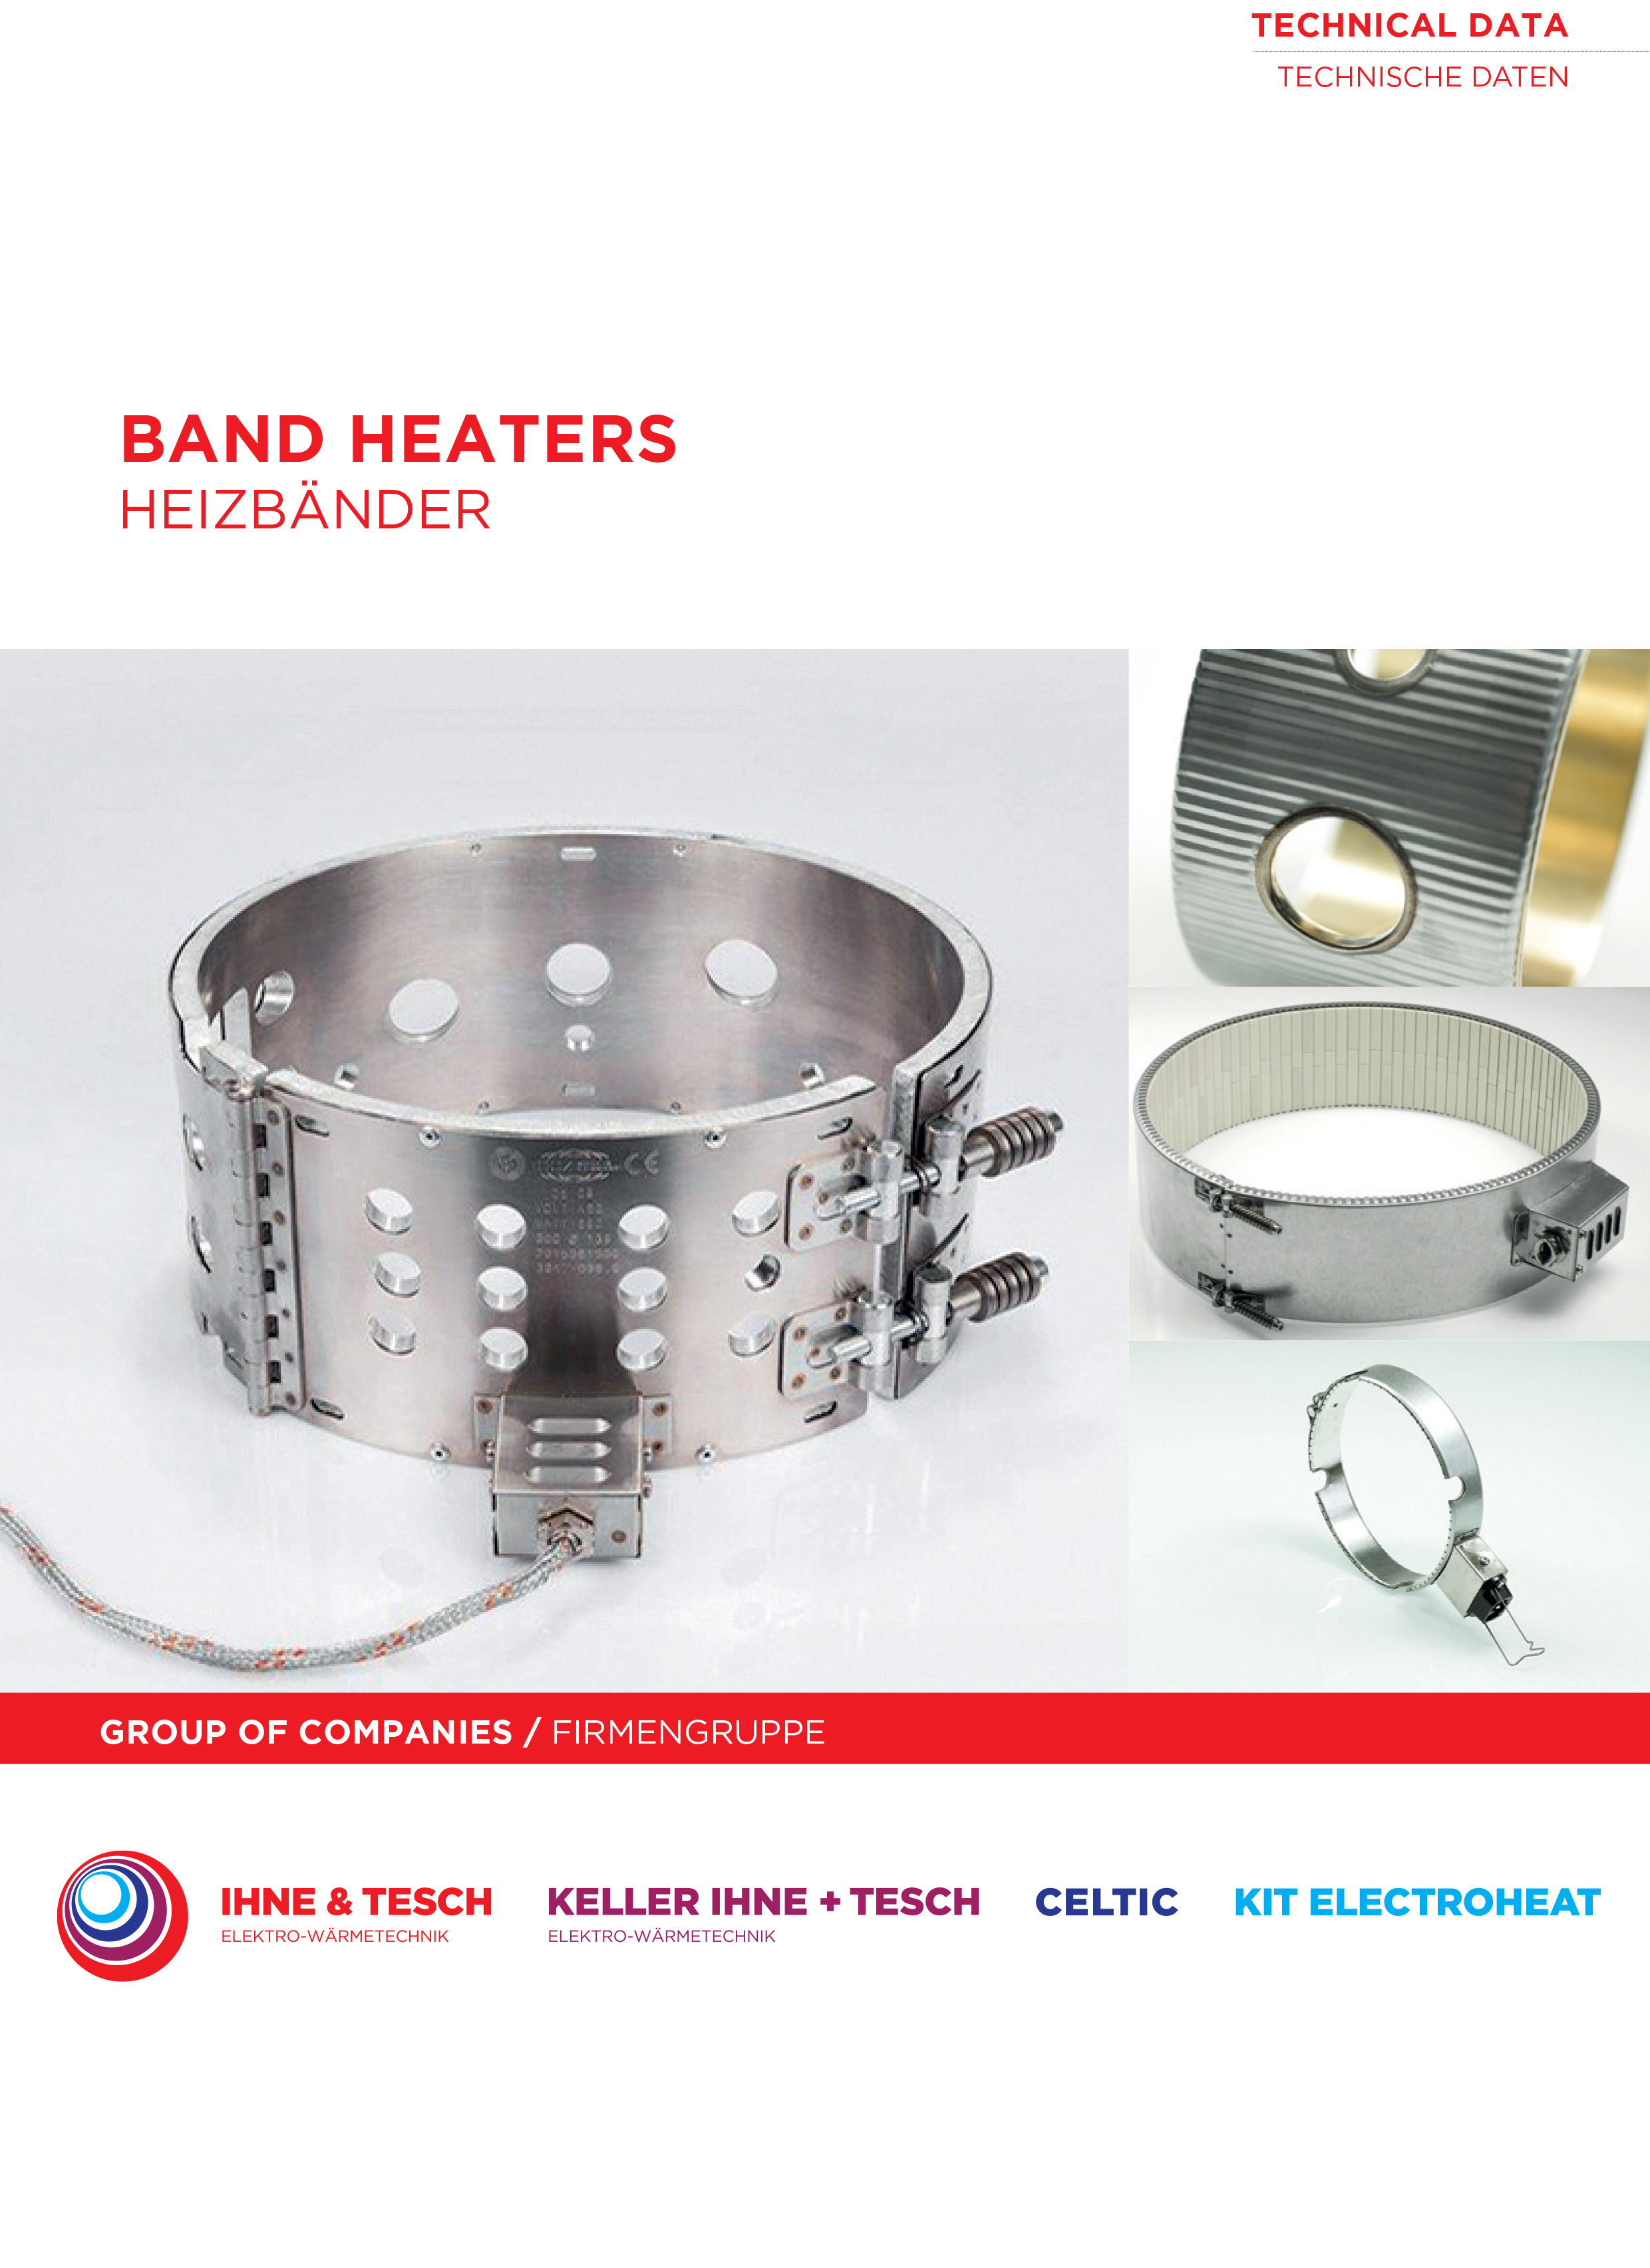 Band-Heaters-technical-data